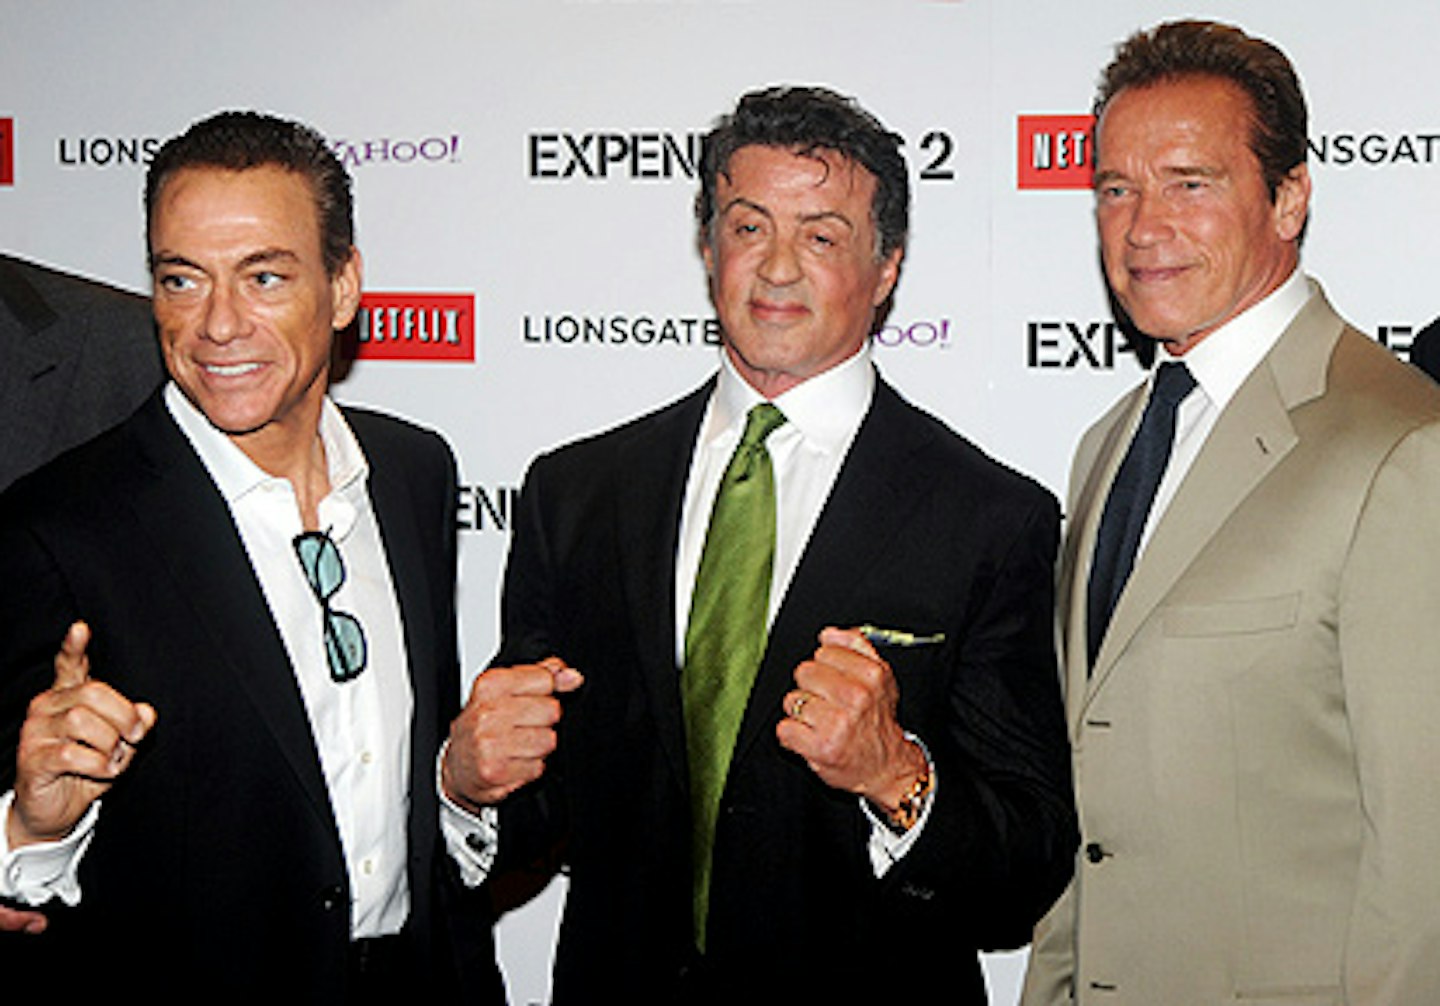 The Expendables 2 Premieres In London